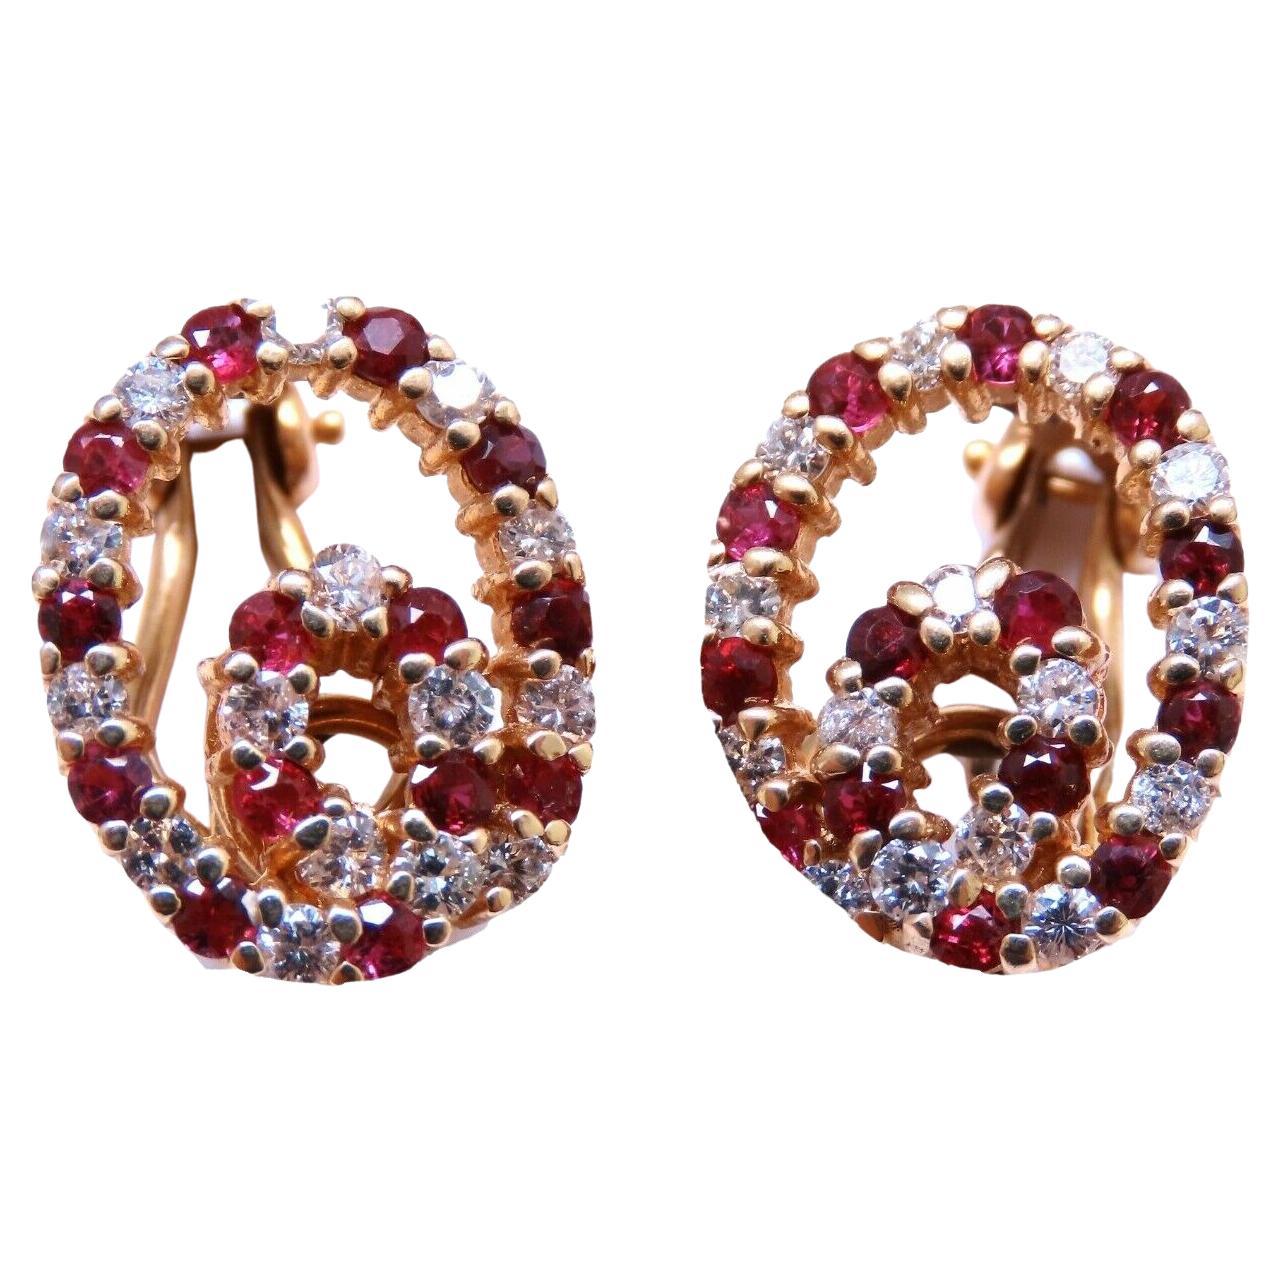 1.15ct. Natural Ruby Diamond Swirl Clip Earrings 14kt For Sale